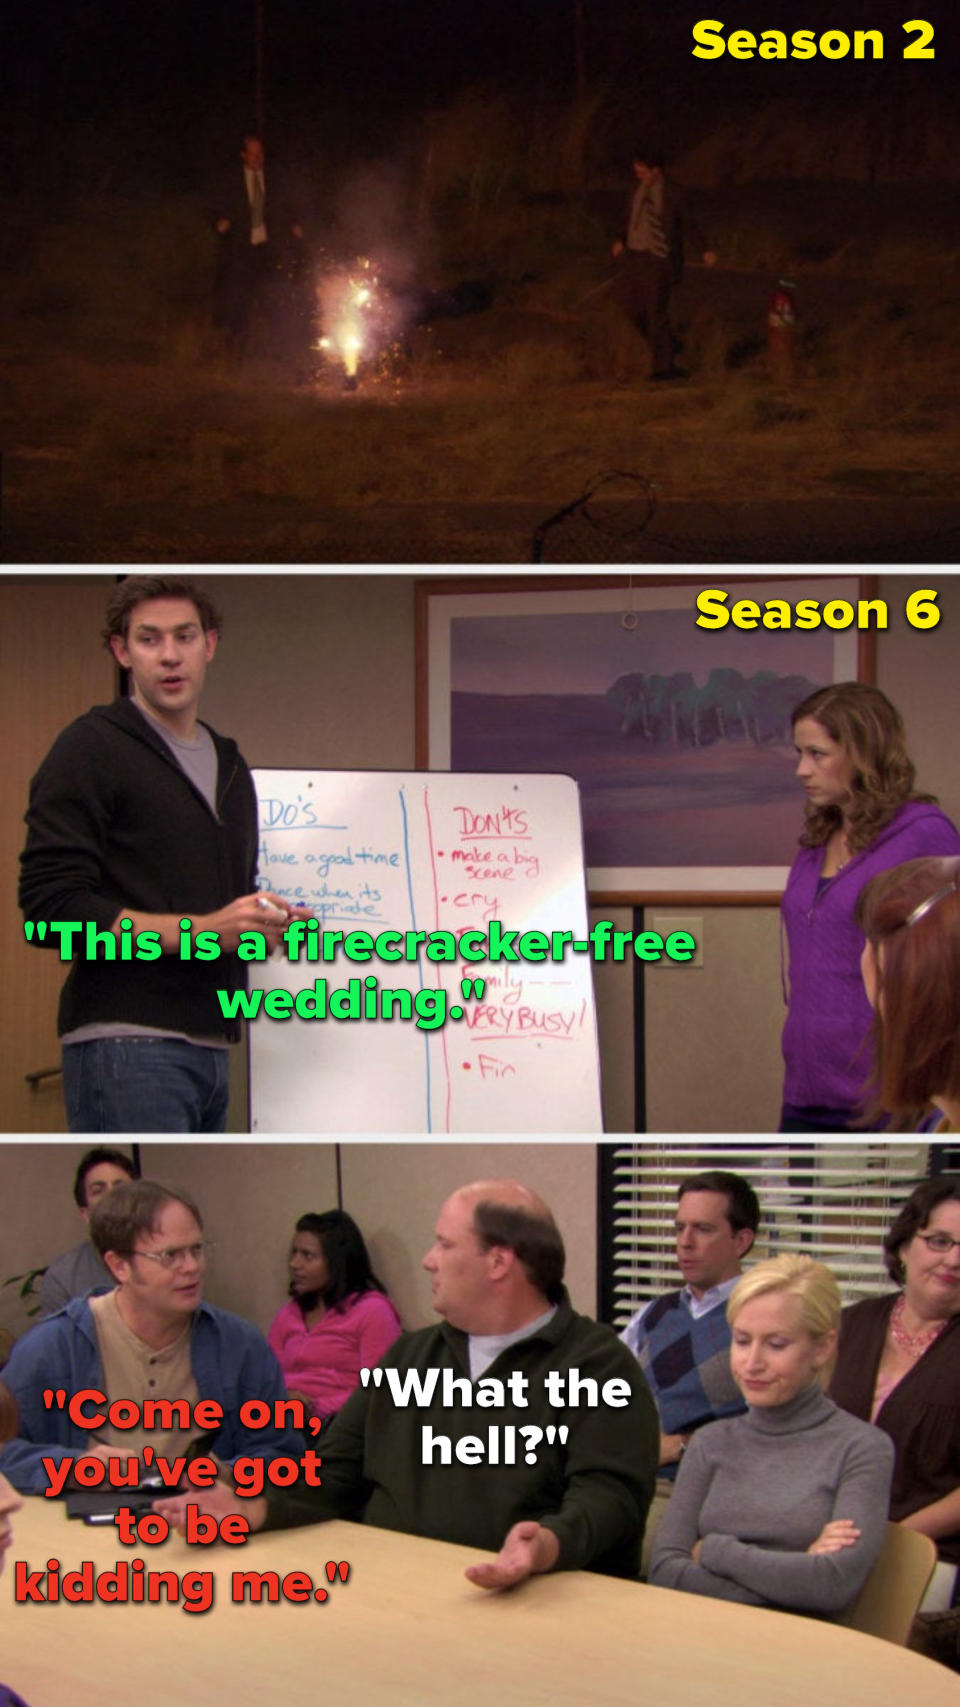 Dwight and Kevin play with firecrackers, and then later Jim says, "This is a firecracker-free wedding," and Kevin says "What the hell," and Dwight says, "Come on, you've got to be kidding me." 